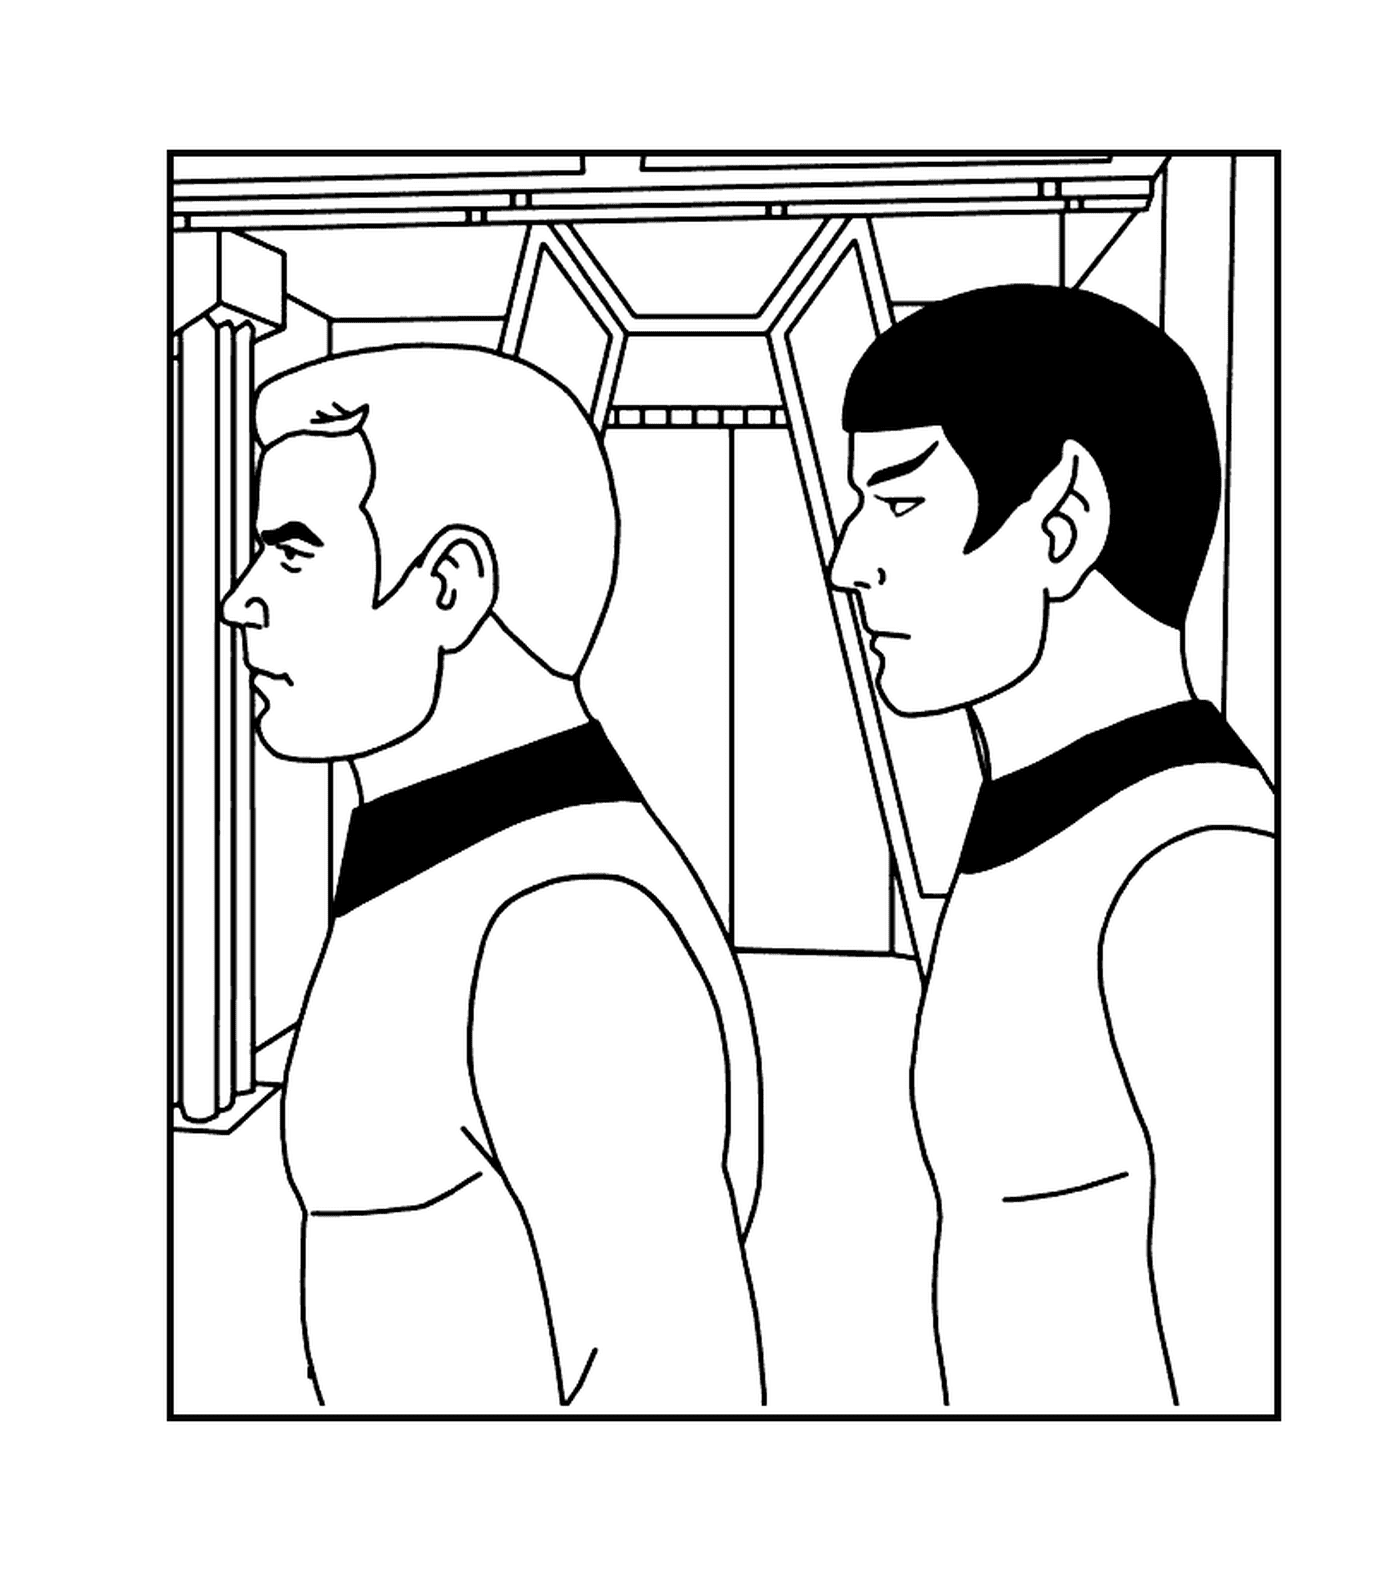  Spock and Kirk by Star Trek 